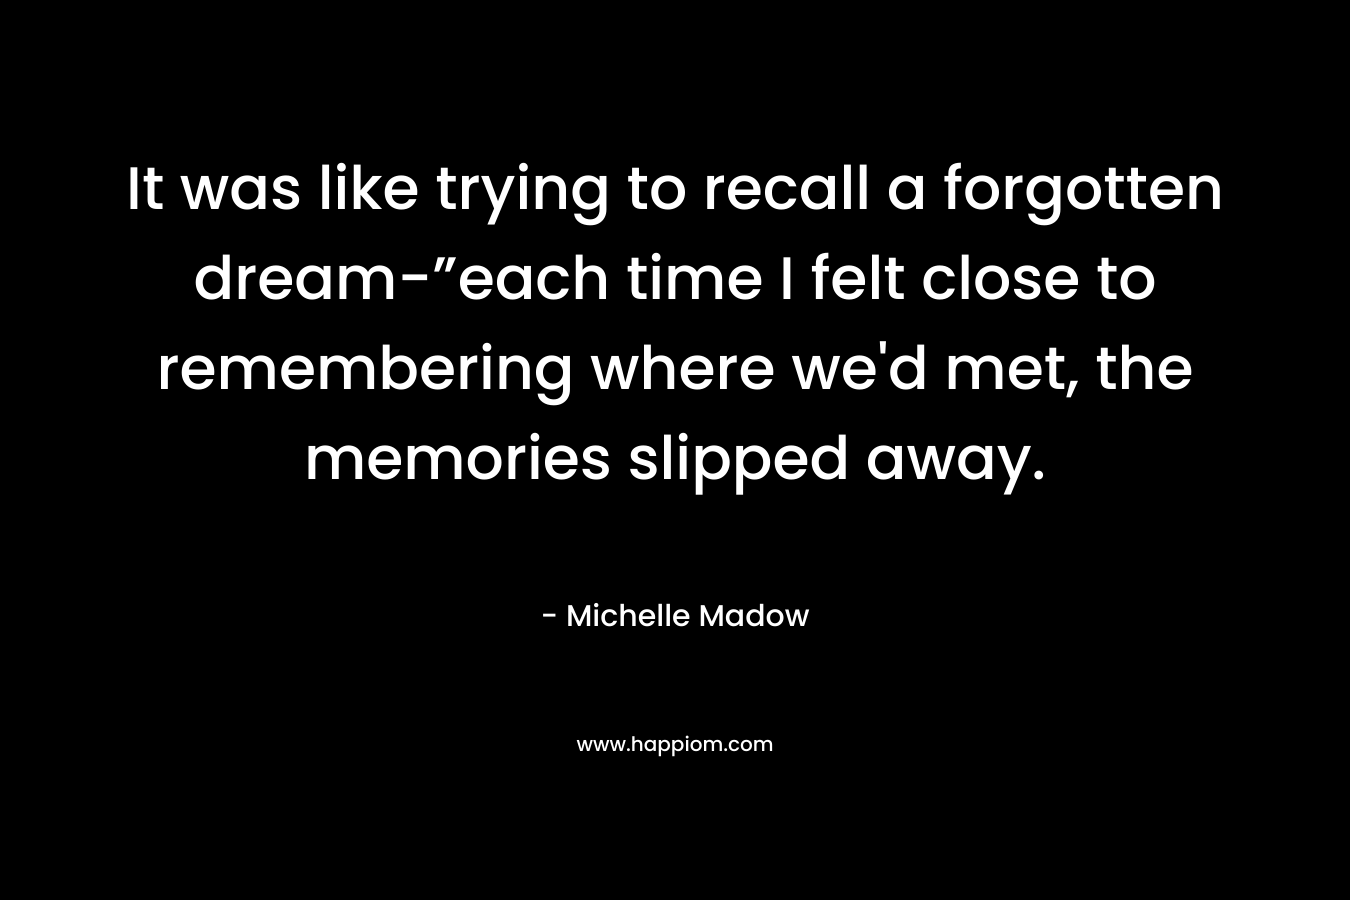 It was like trying to recall a forgotten dream-”each time I felt close to remembering where we’d met, the memories slipped away. – Michelle Madow